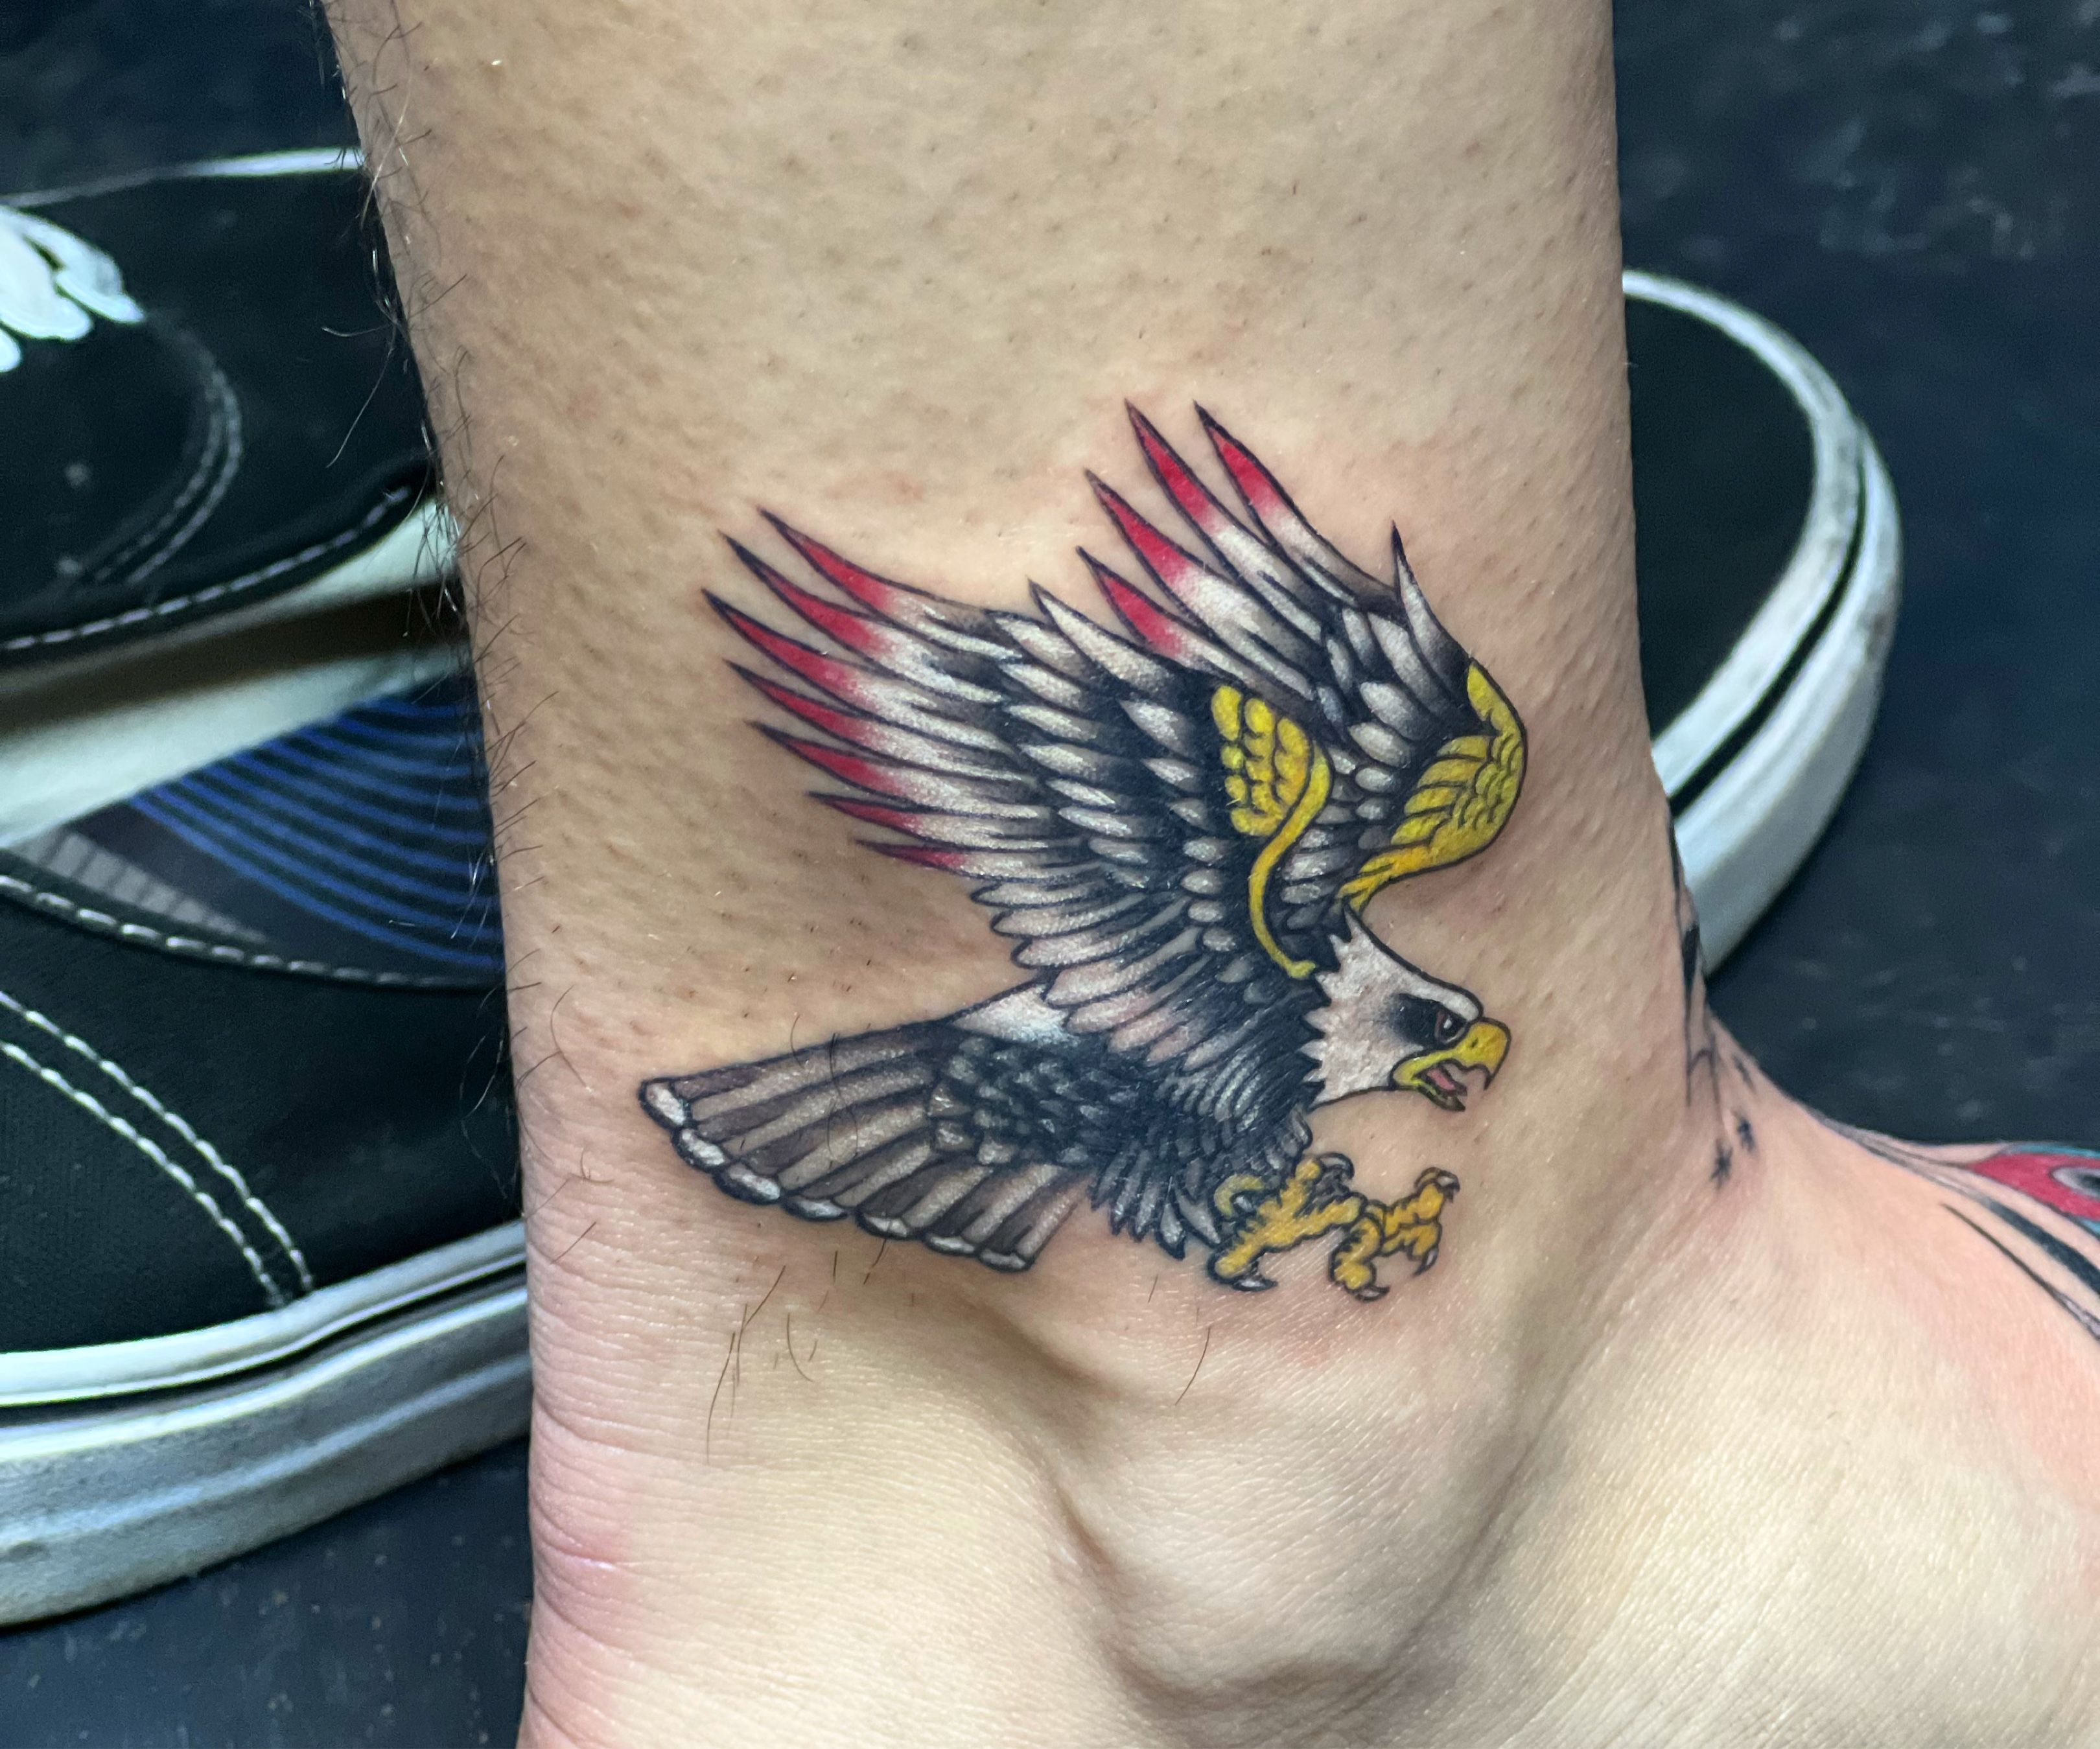 Eagle Tattoos A Guide To Finding The Right Design For You